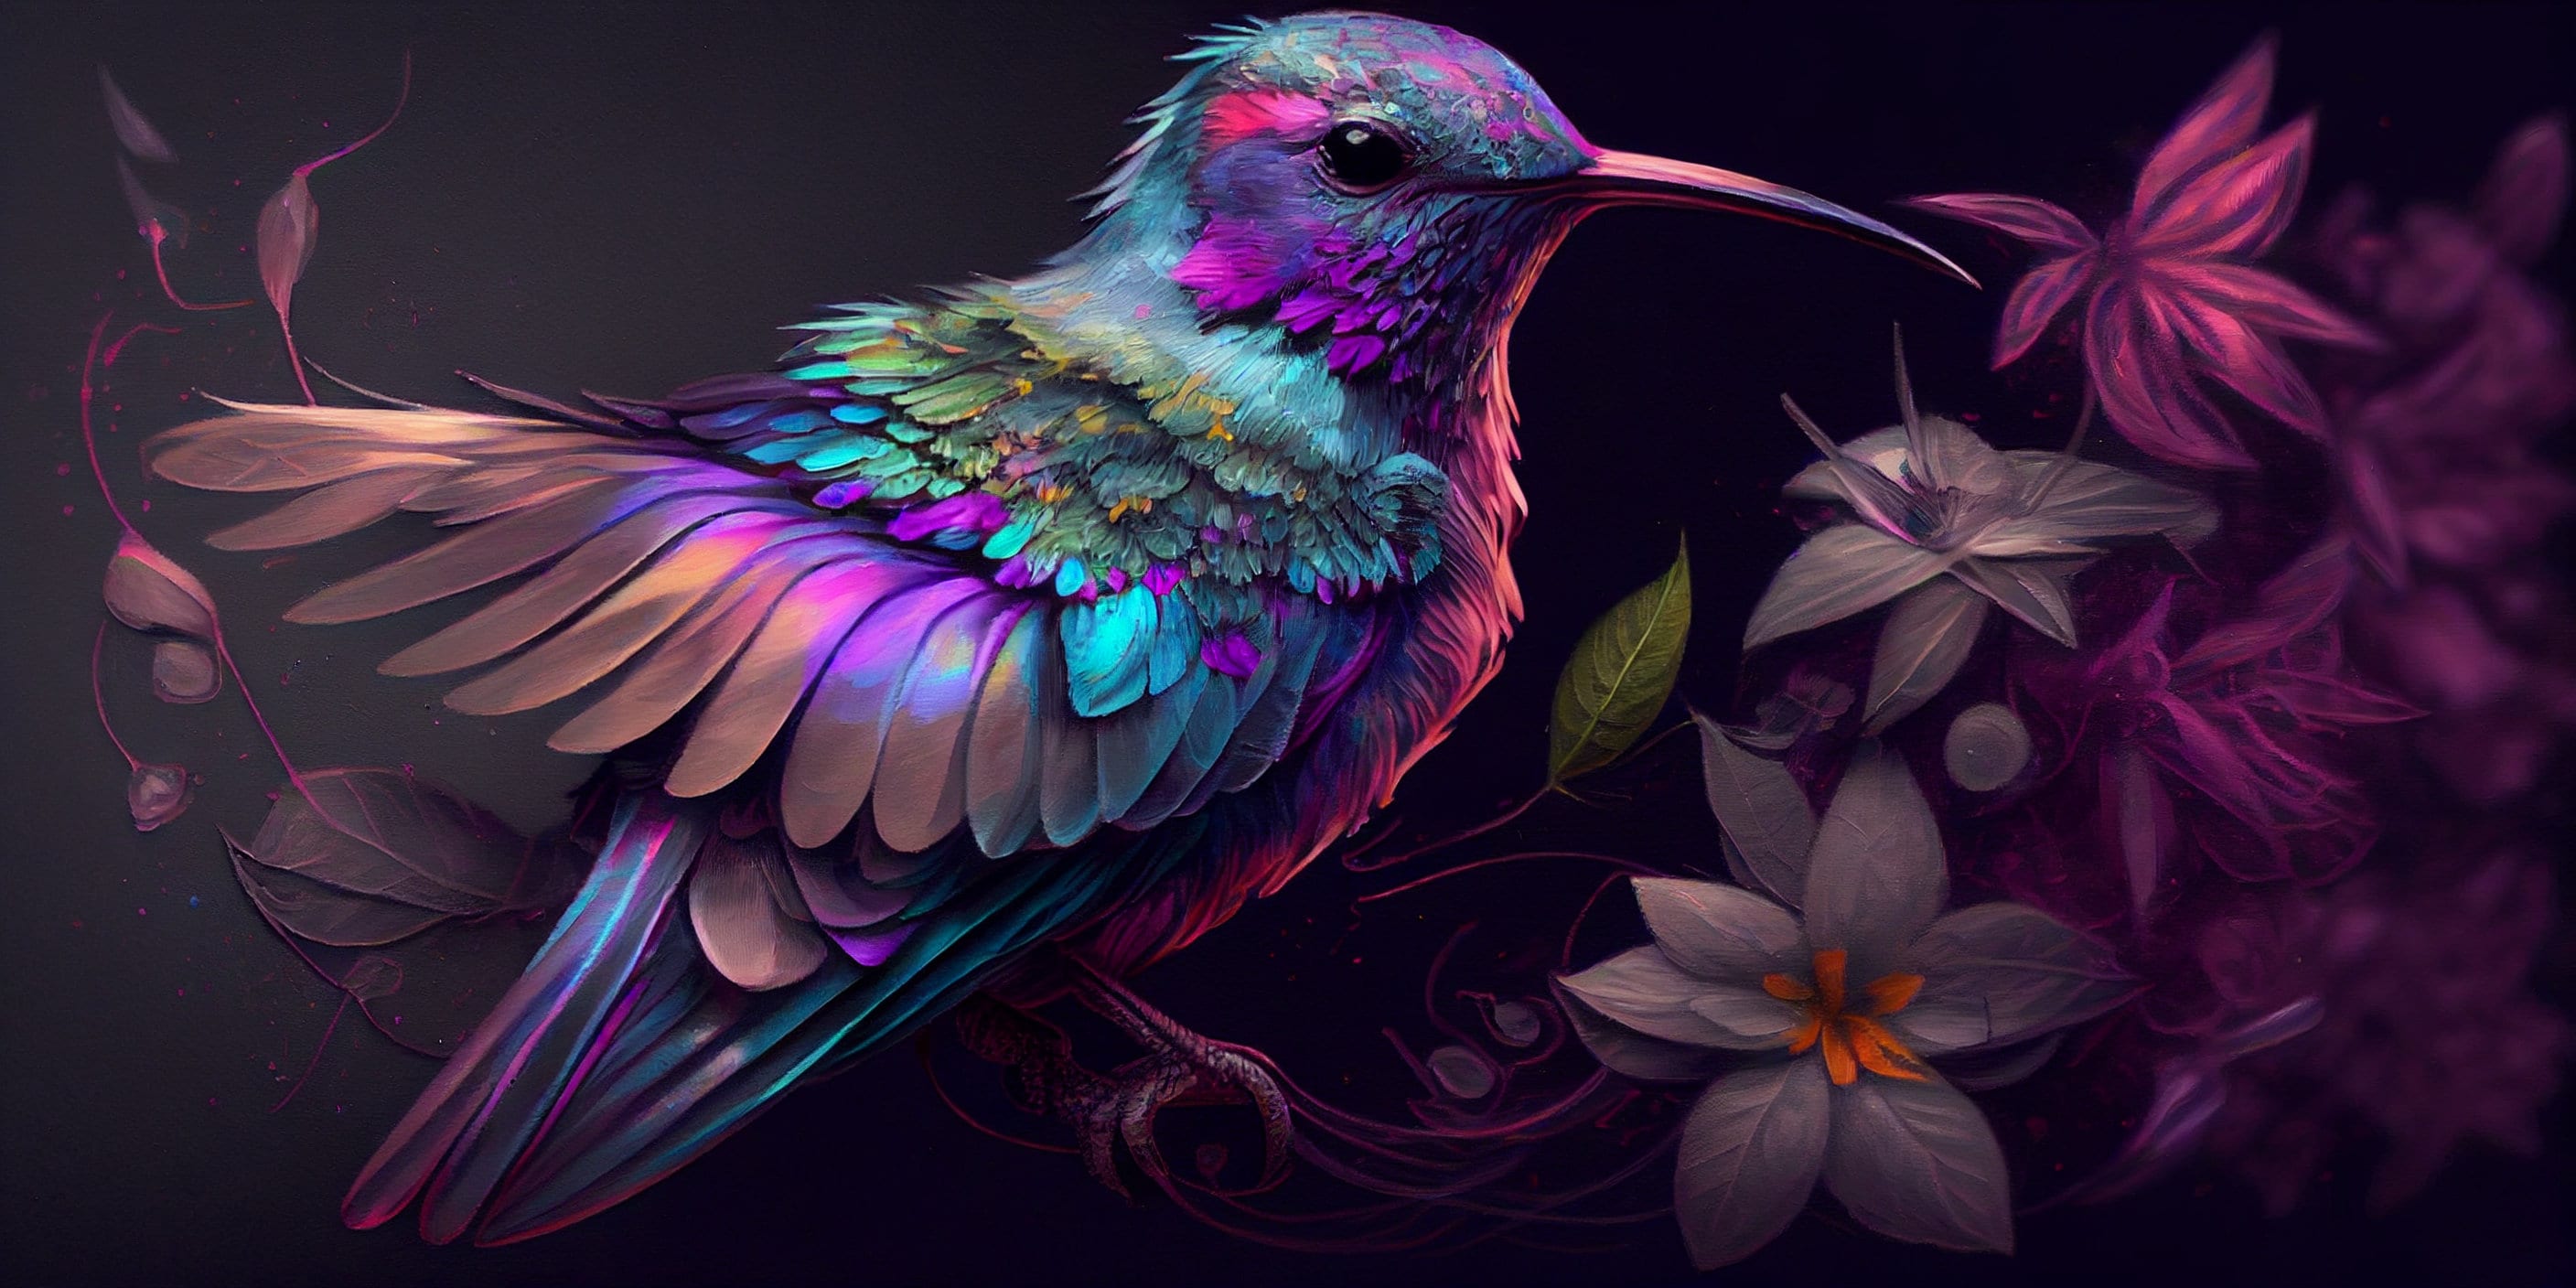 Hummingbird flying among colorful flowers HD wallpaper download